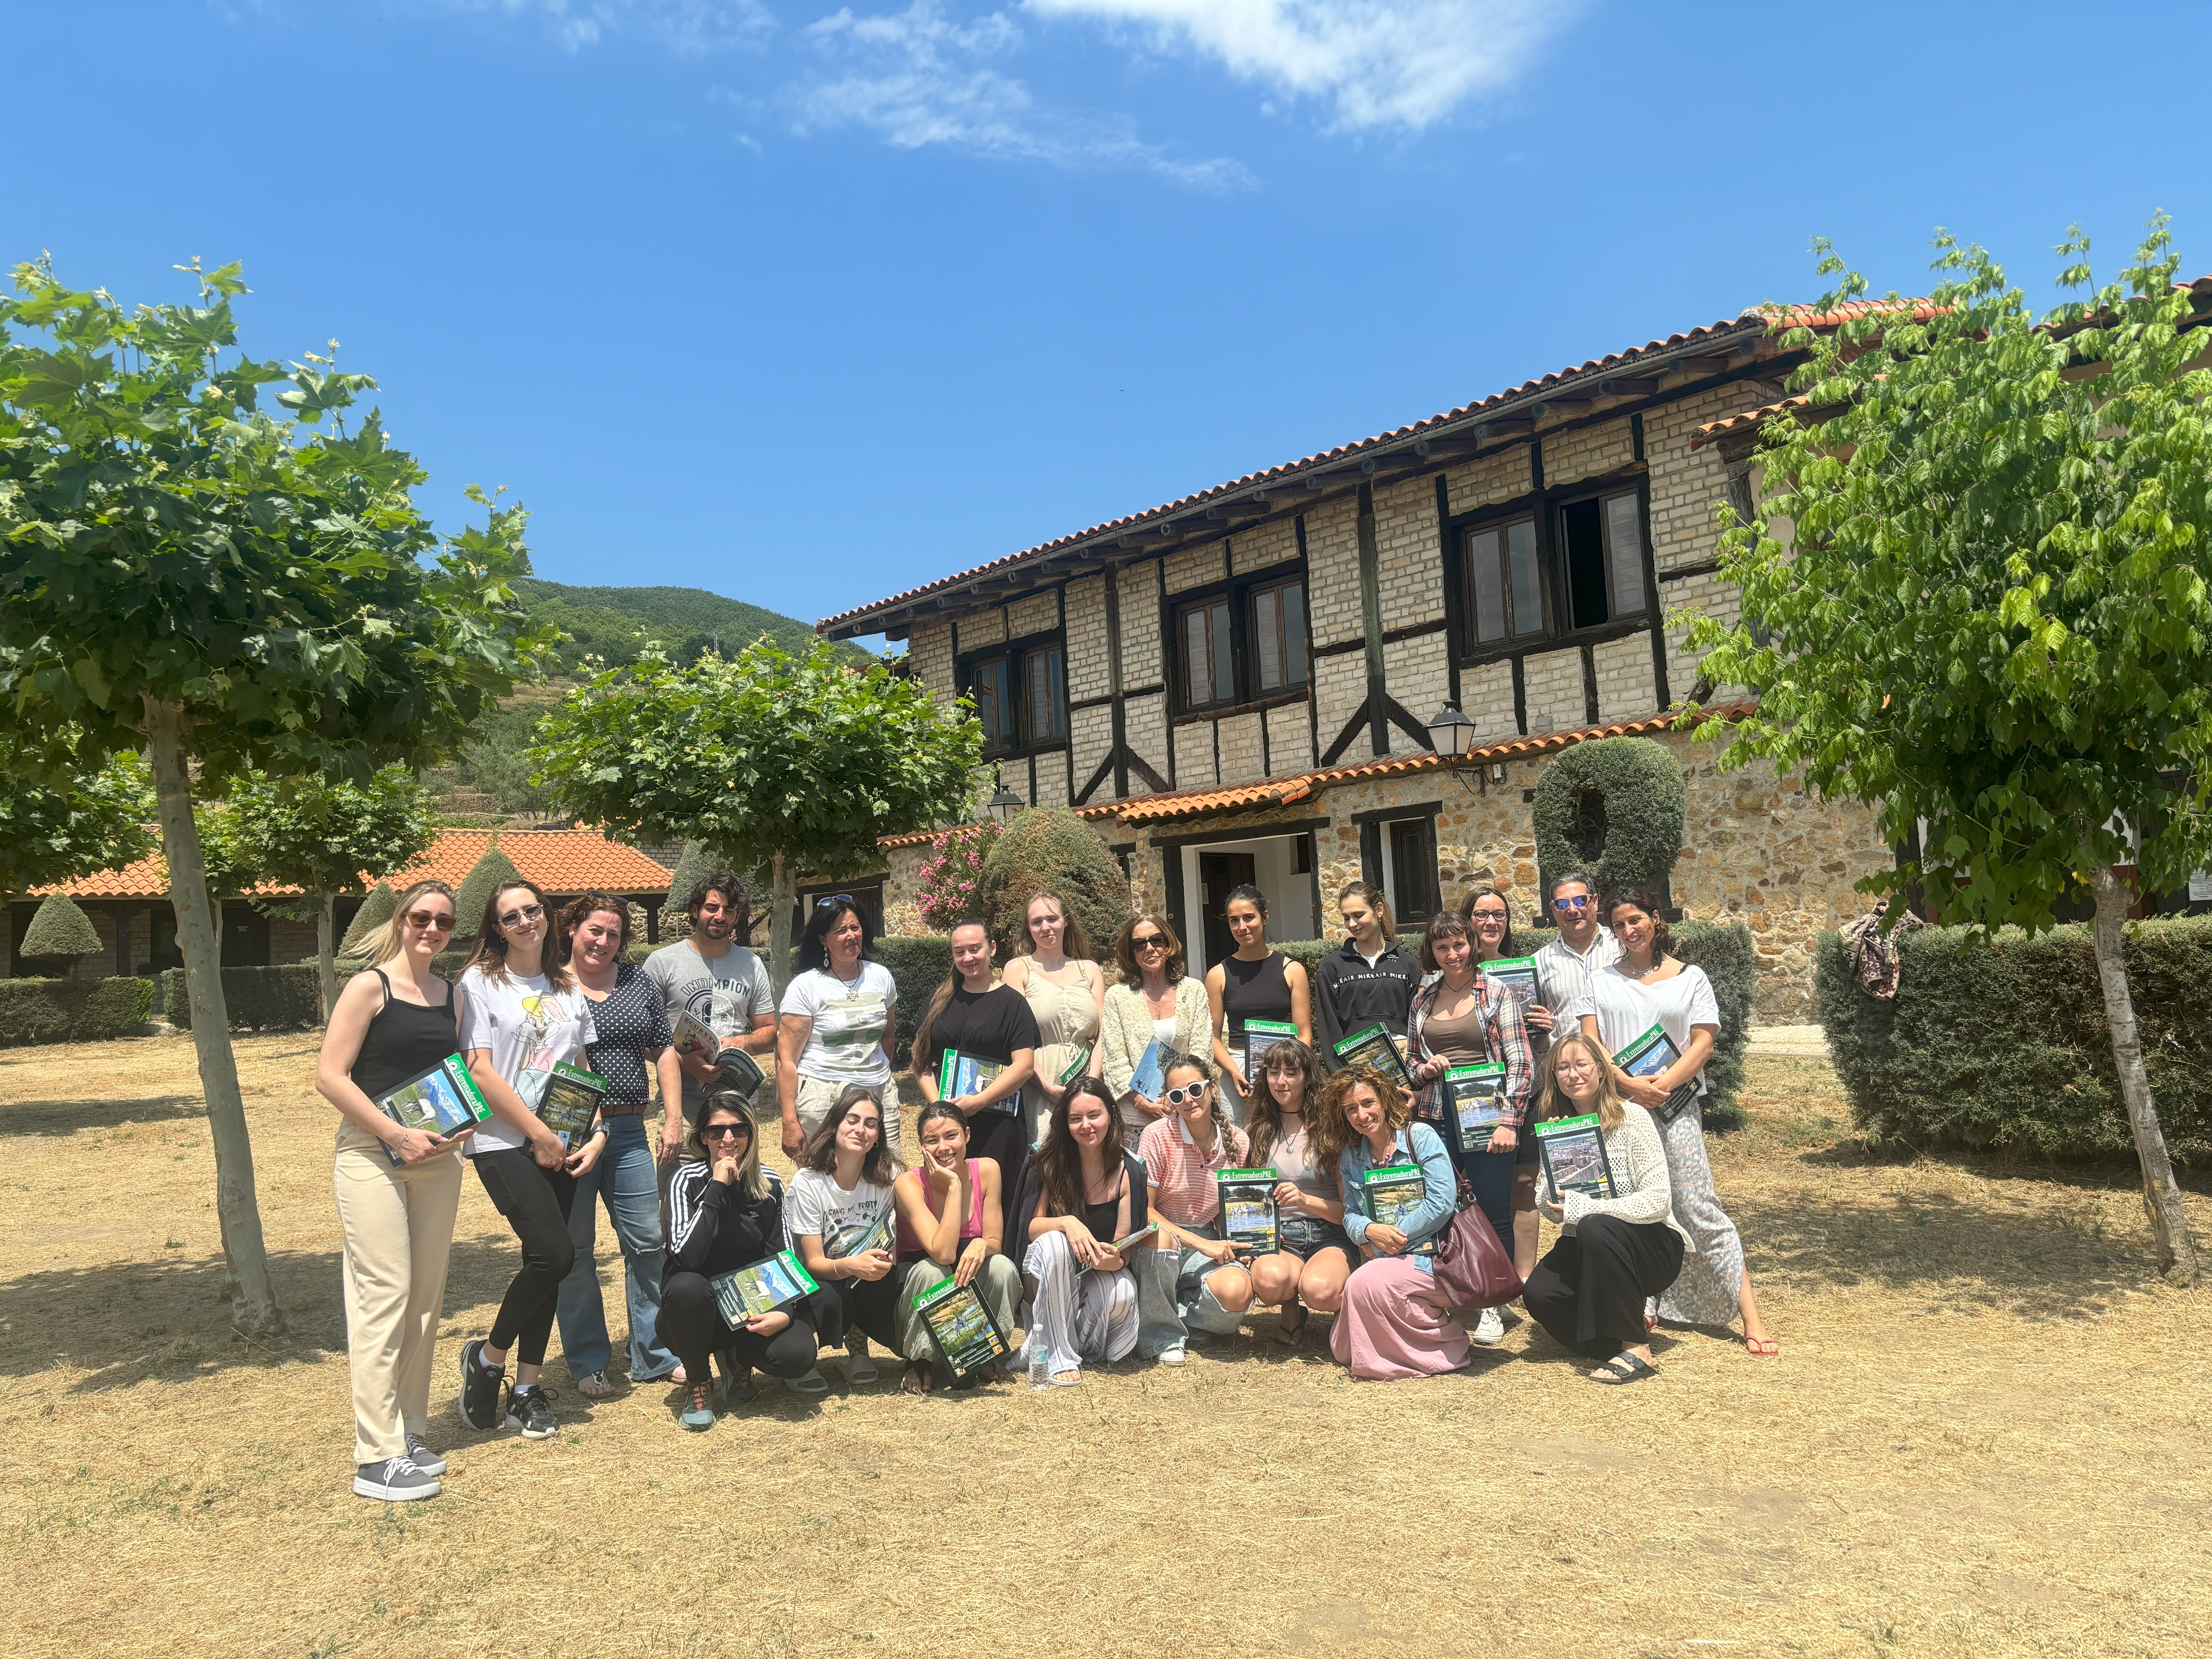 Youth Exchange Blog: Equestrian Tourism in Spain by Carmen pilt